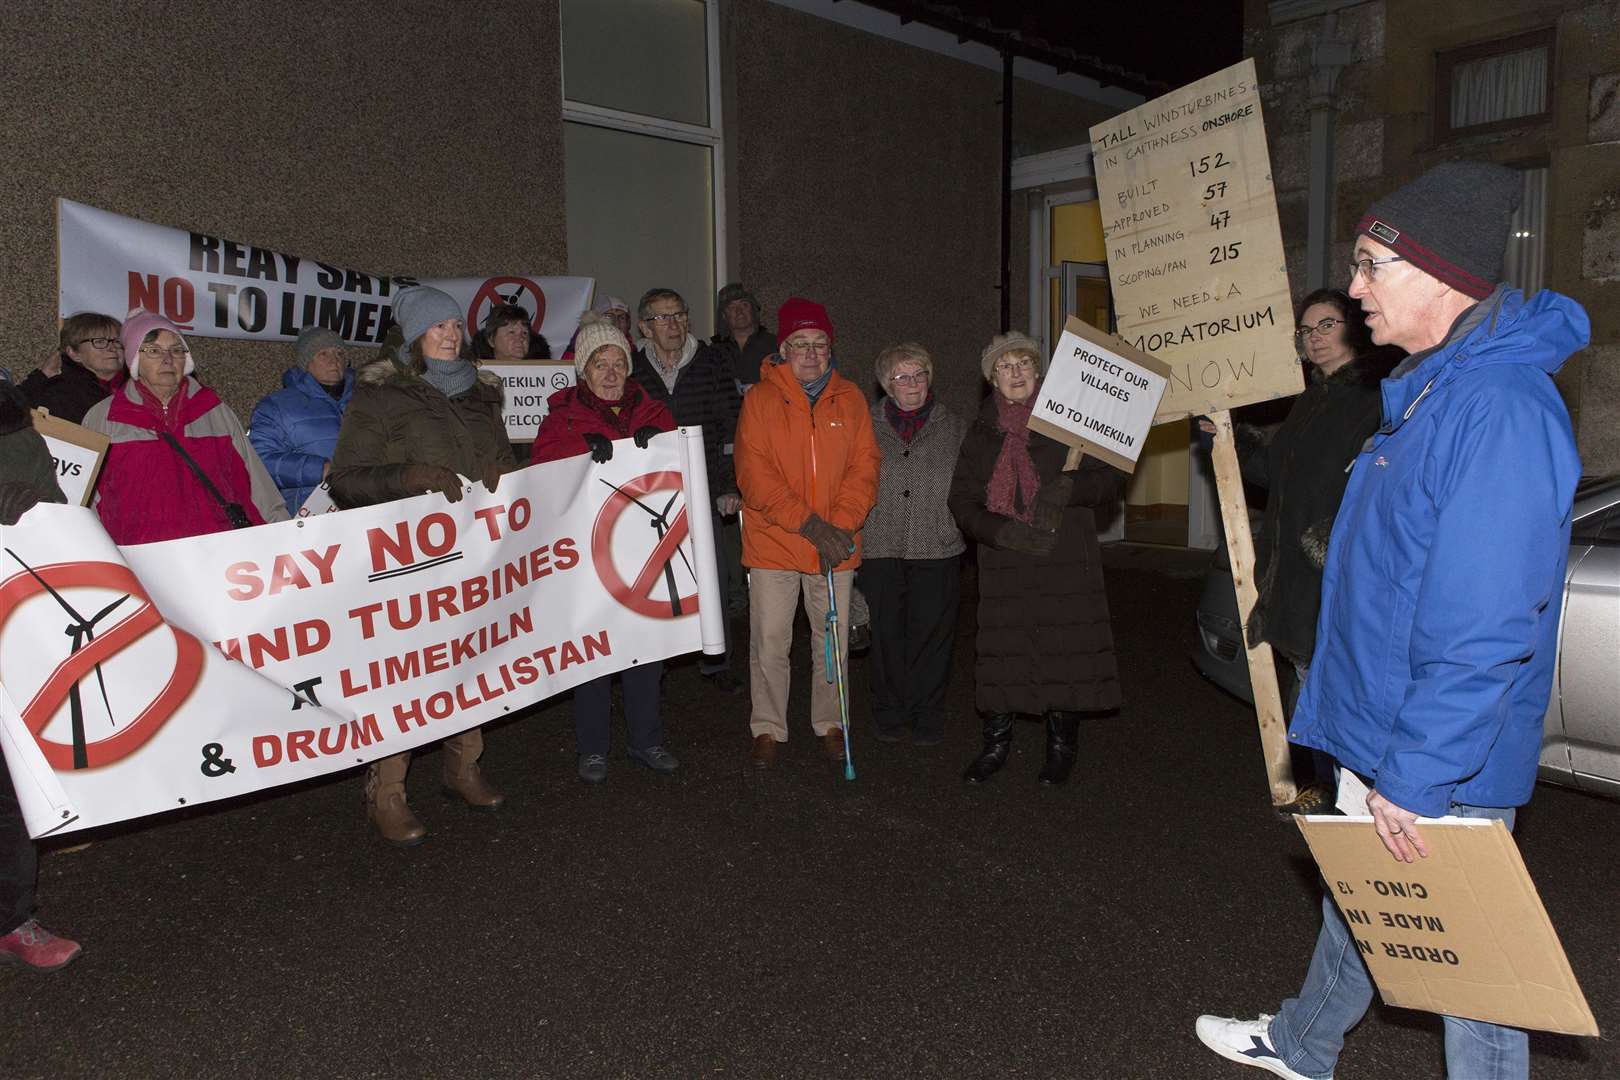 Protesters at Reay in November showing their opposition to new wind energy developments at Limekiln and Drum Hollistan. Picture: Robert MacDonald / Northern Studios